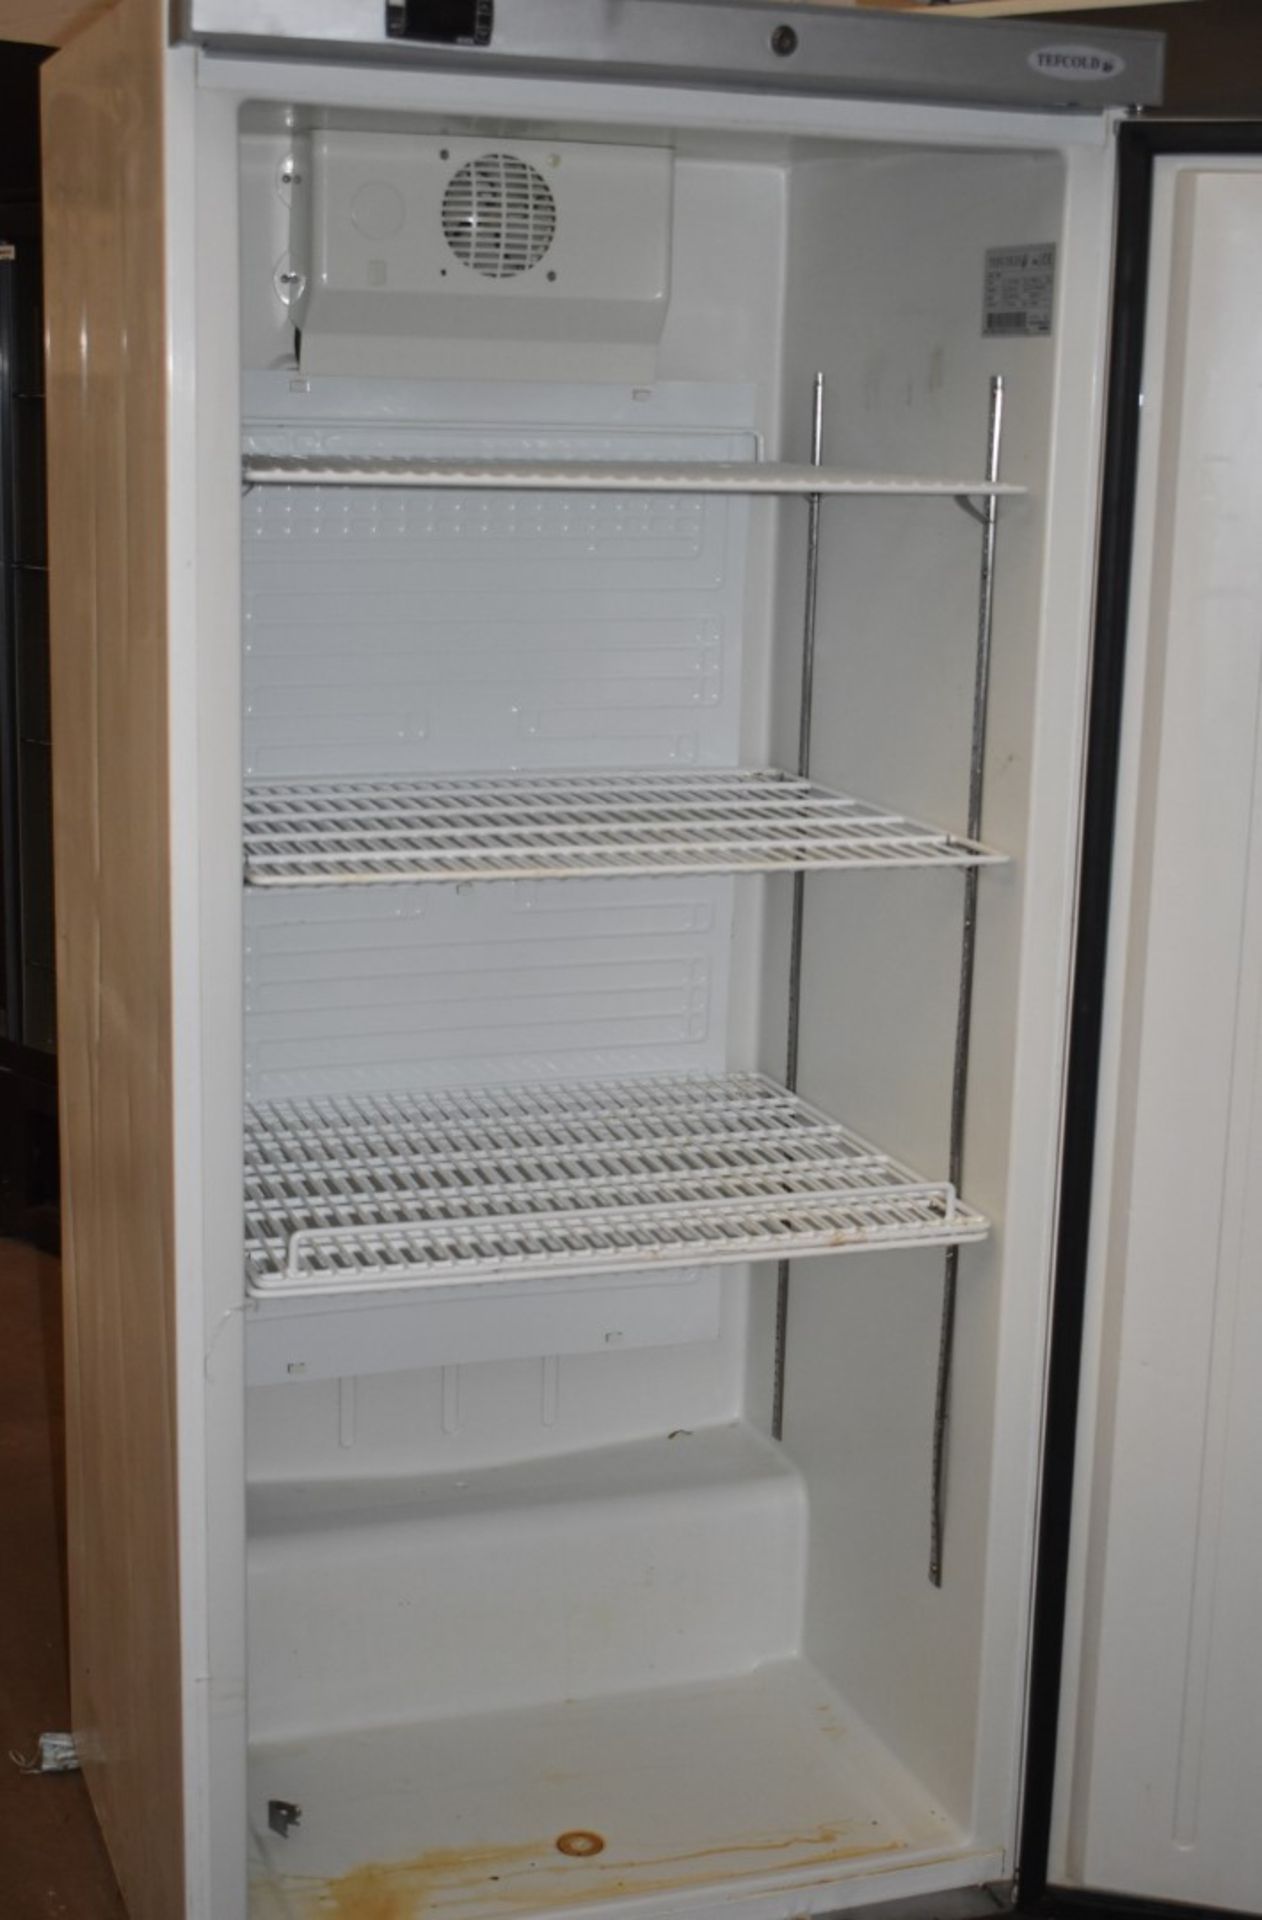 1 x Tefcold UR55 Upright Commercial Solid Door Refrigerator - Size: H172 x W77.7 x D72cms - Ref: - Image 7 of 8